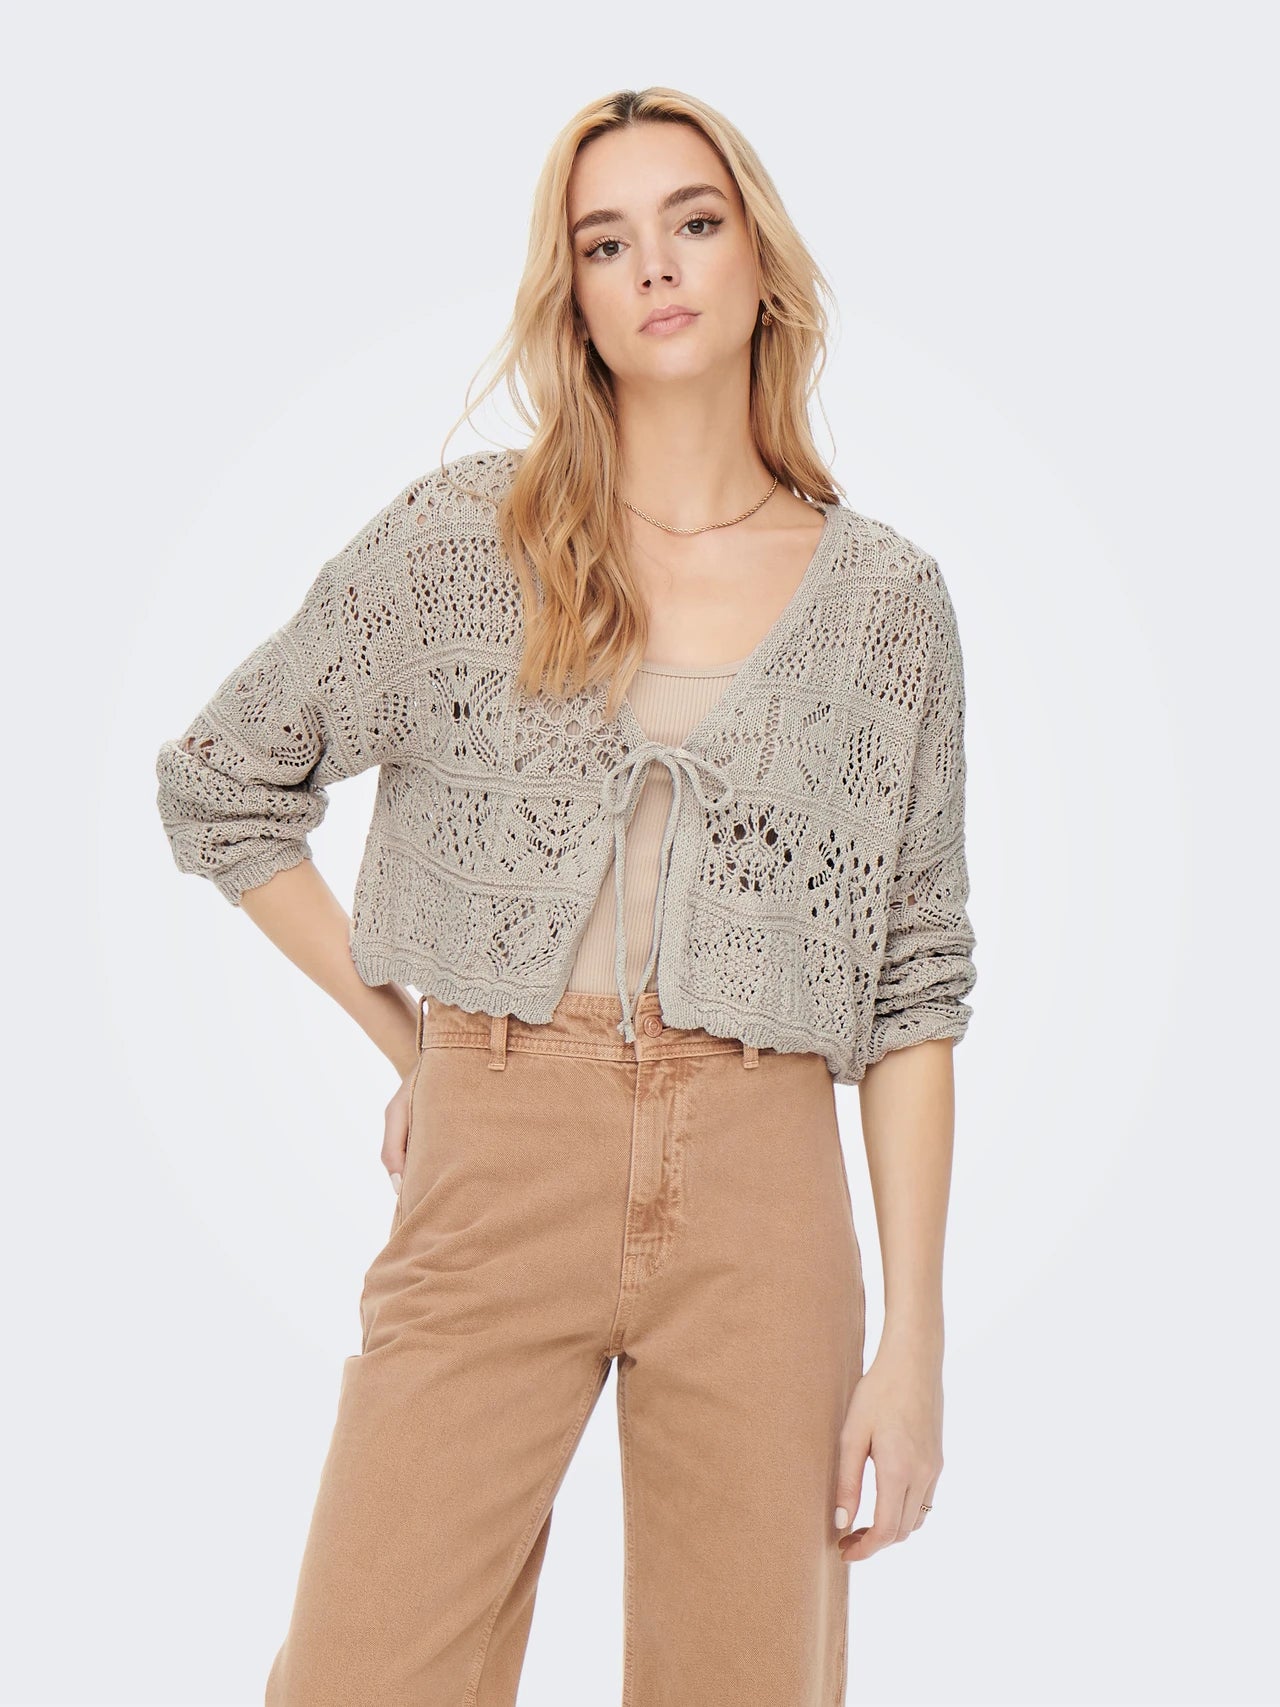 ONLY Beach Life Knit Cardigan